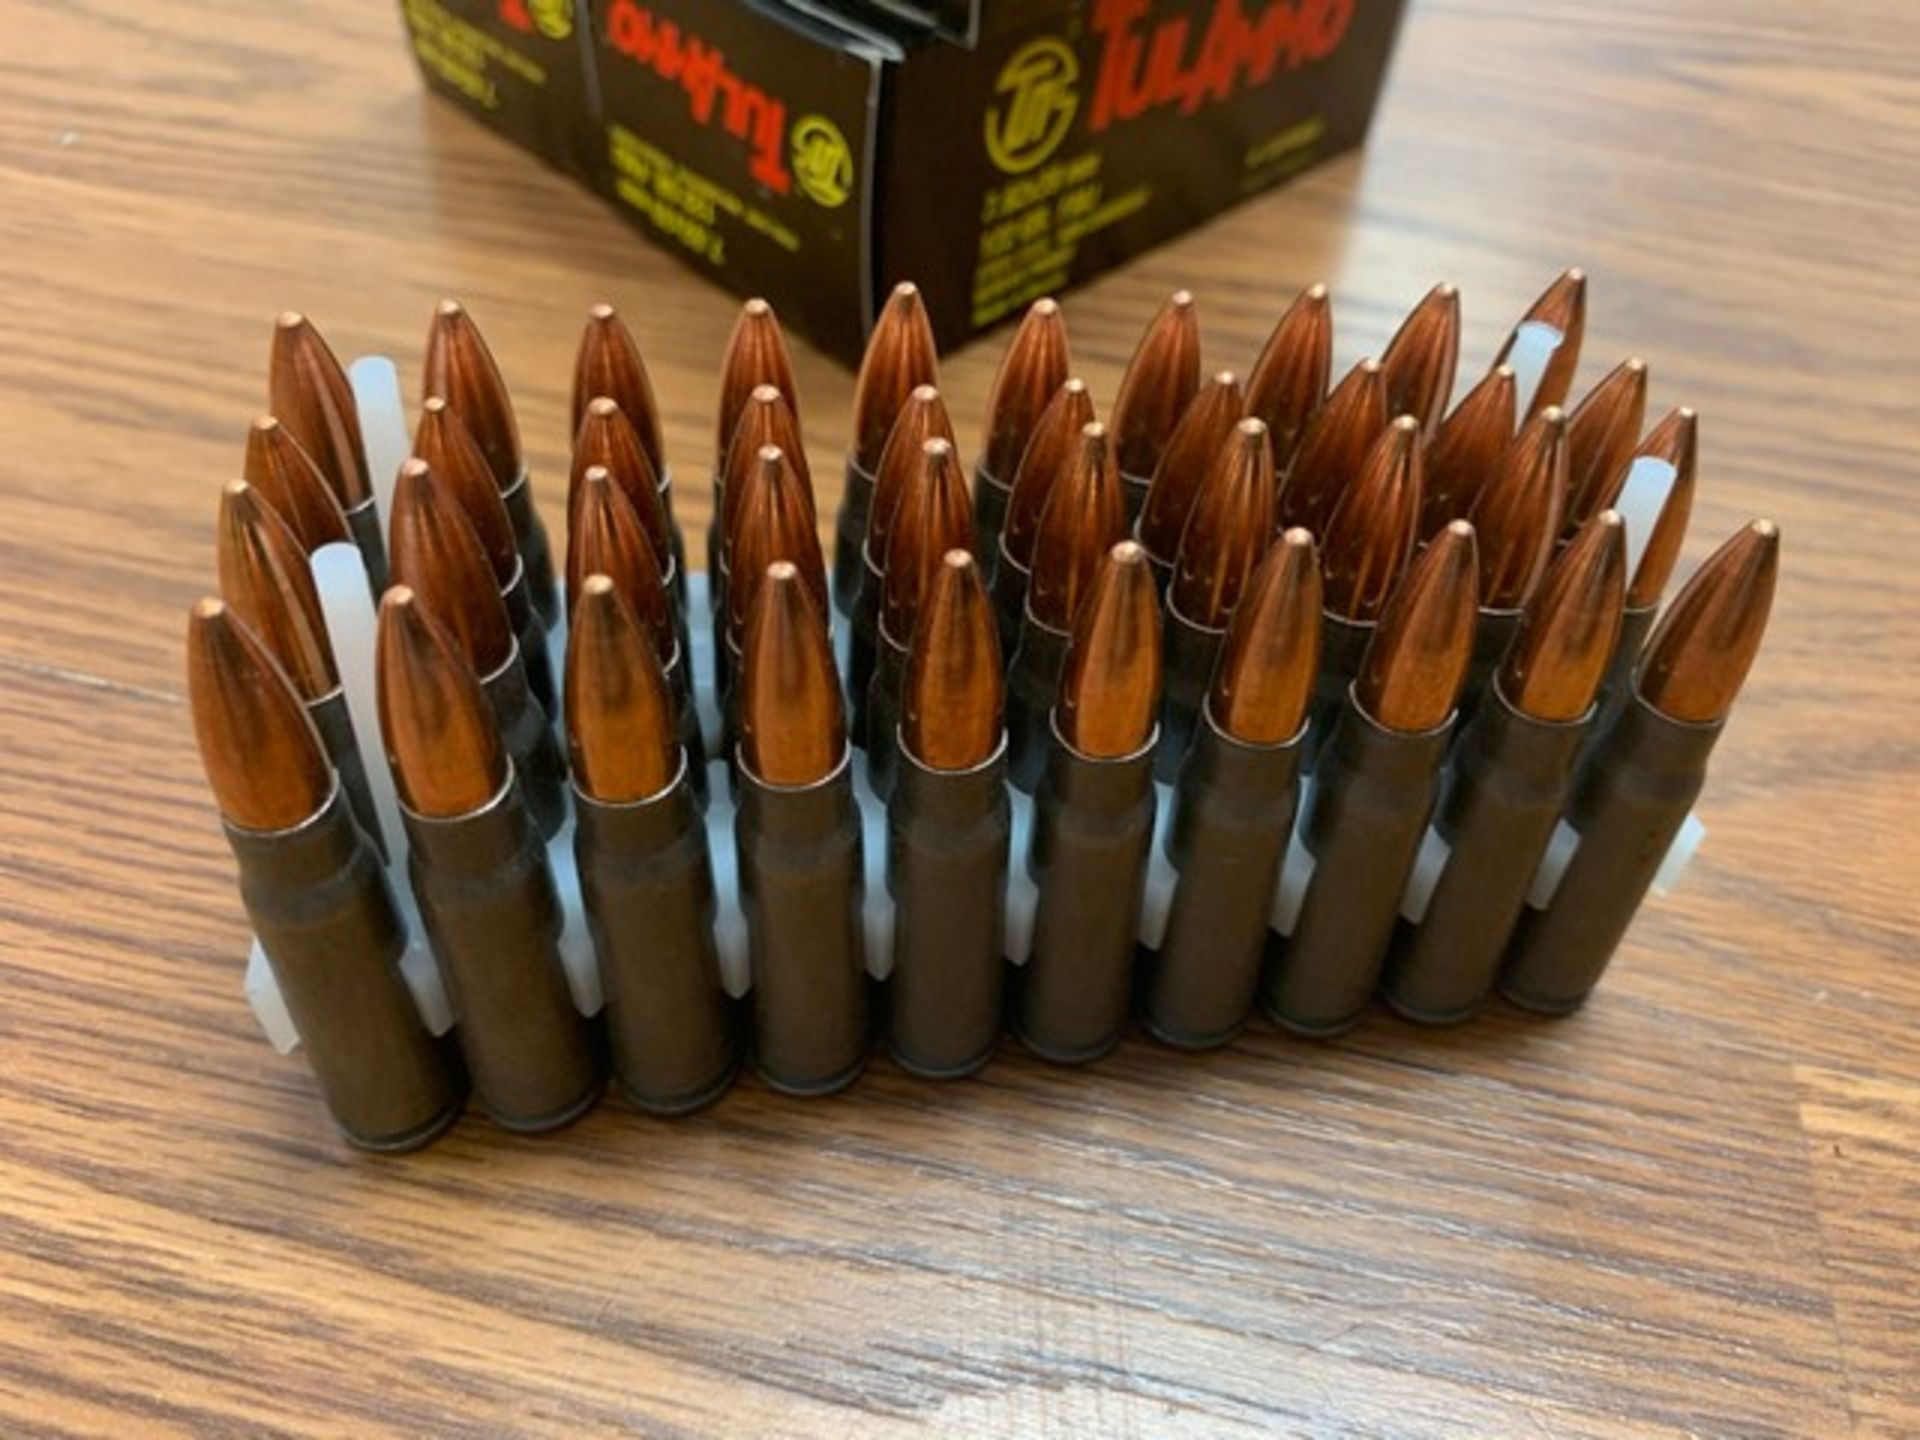 BOXES 7.62x39mm 122 GRAIN FMJ STEELCASE AK AMMUNITION (40 ROUNDS PER BOX/200 ROUNDS TOTAL) (FOB - Image 2 of 3